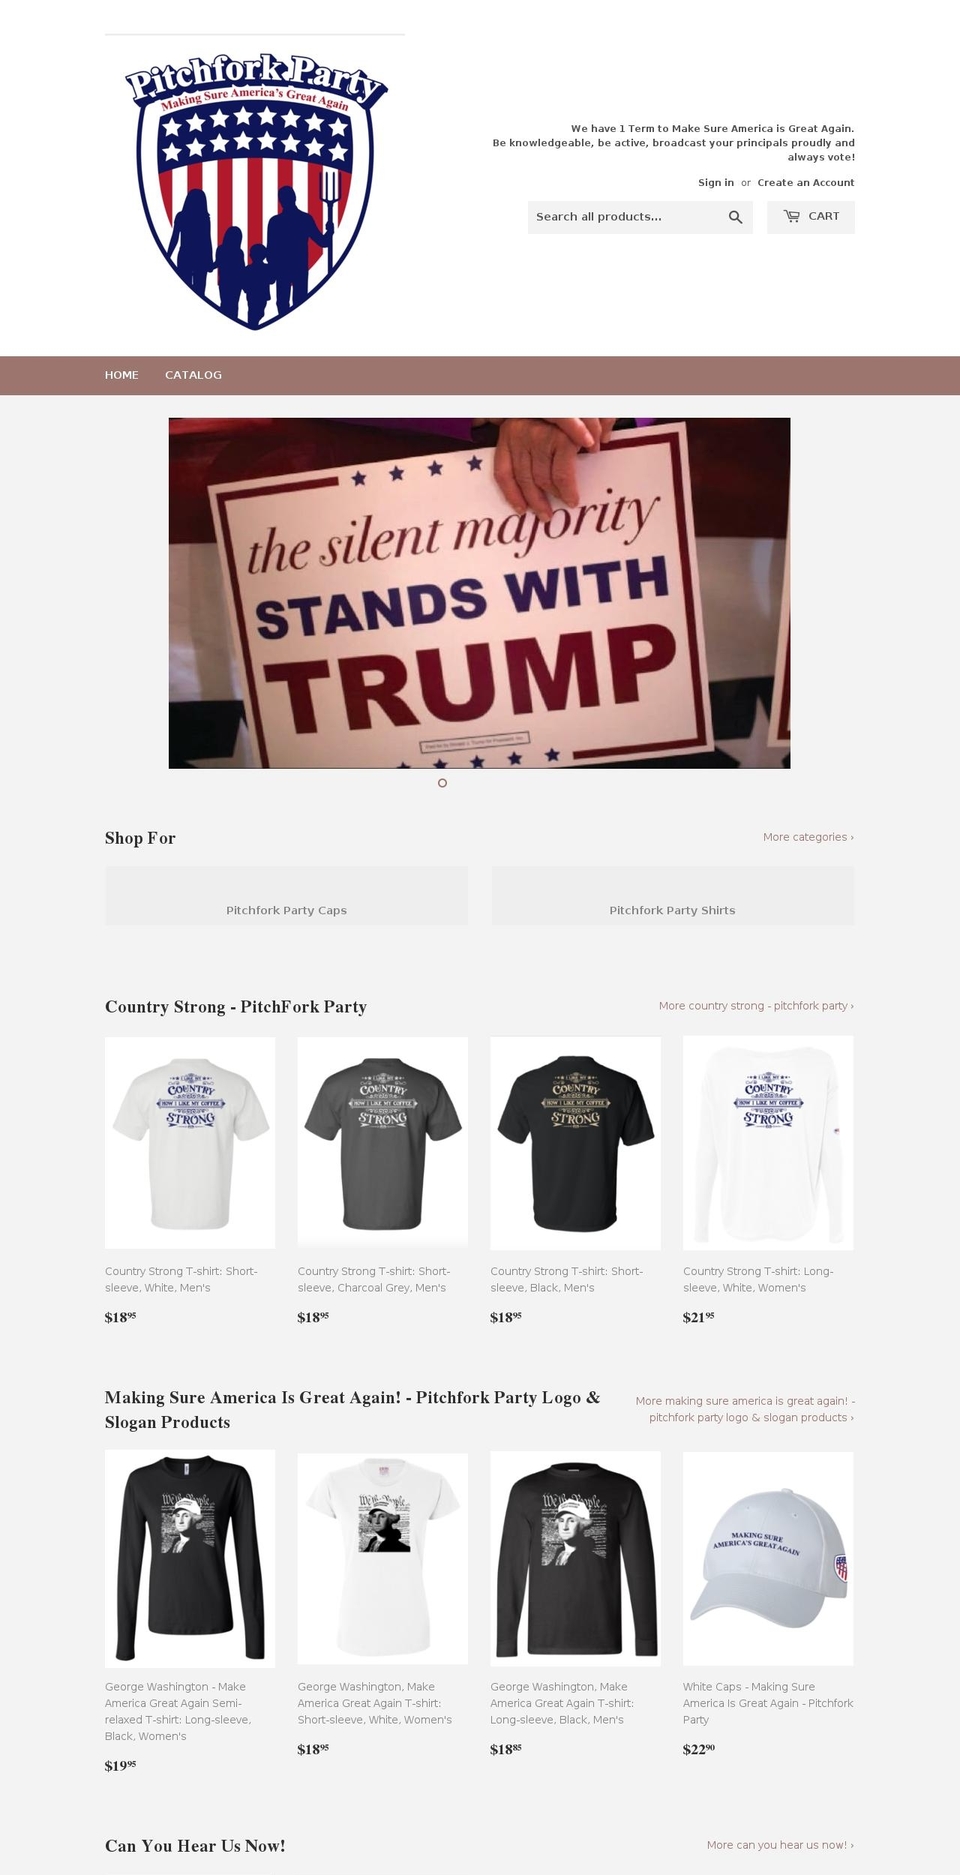 Making Sure America Is Great Again! Shopify theme site example pitchfork-party.com